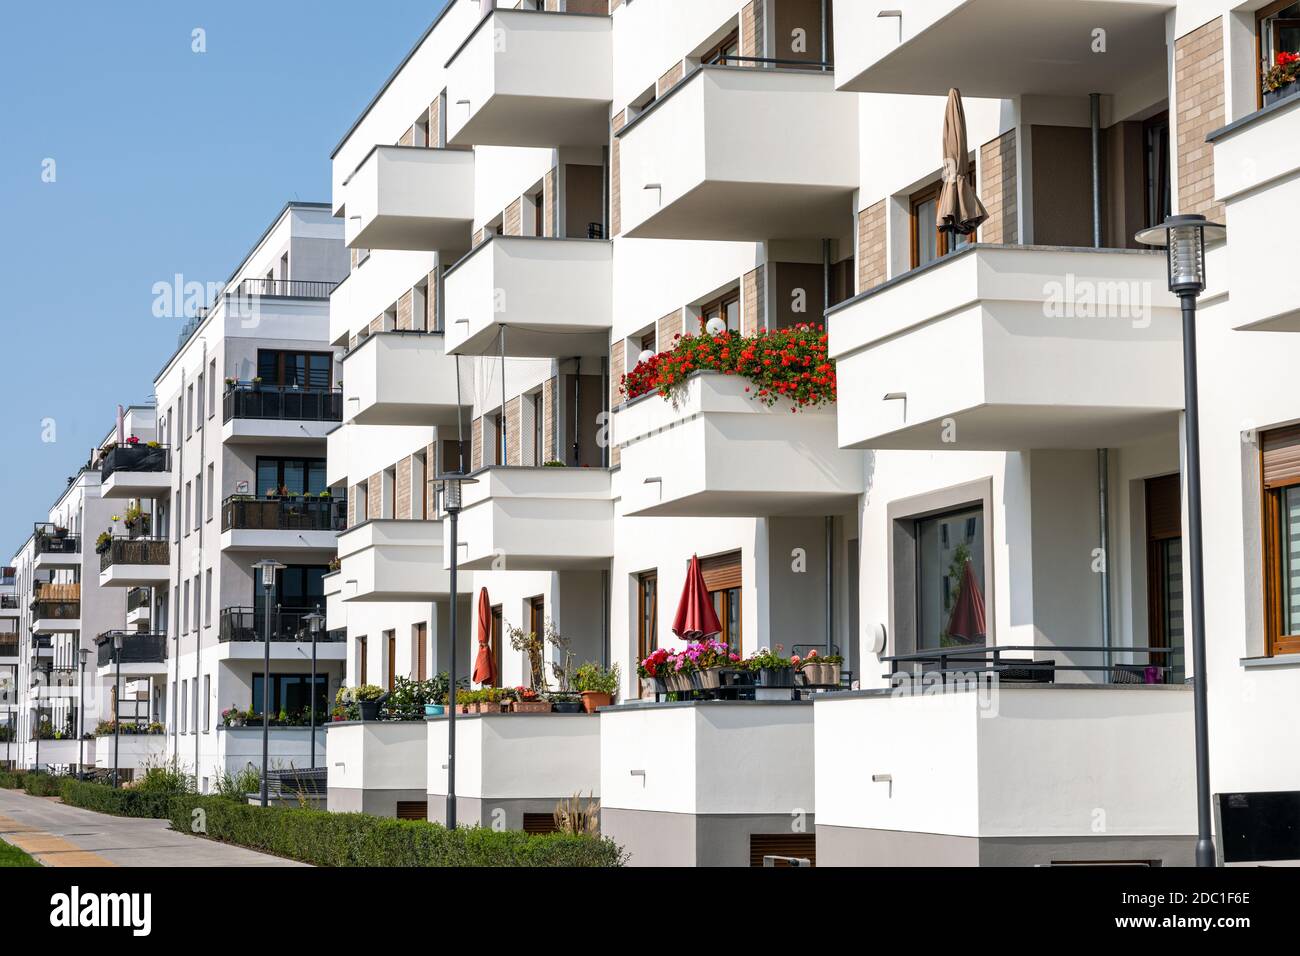 Modern apartment buildings with many balconies seen in Berlin Stock Photo